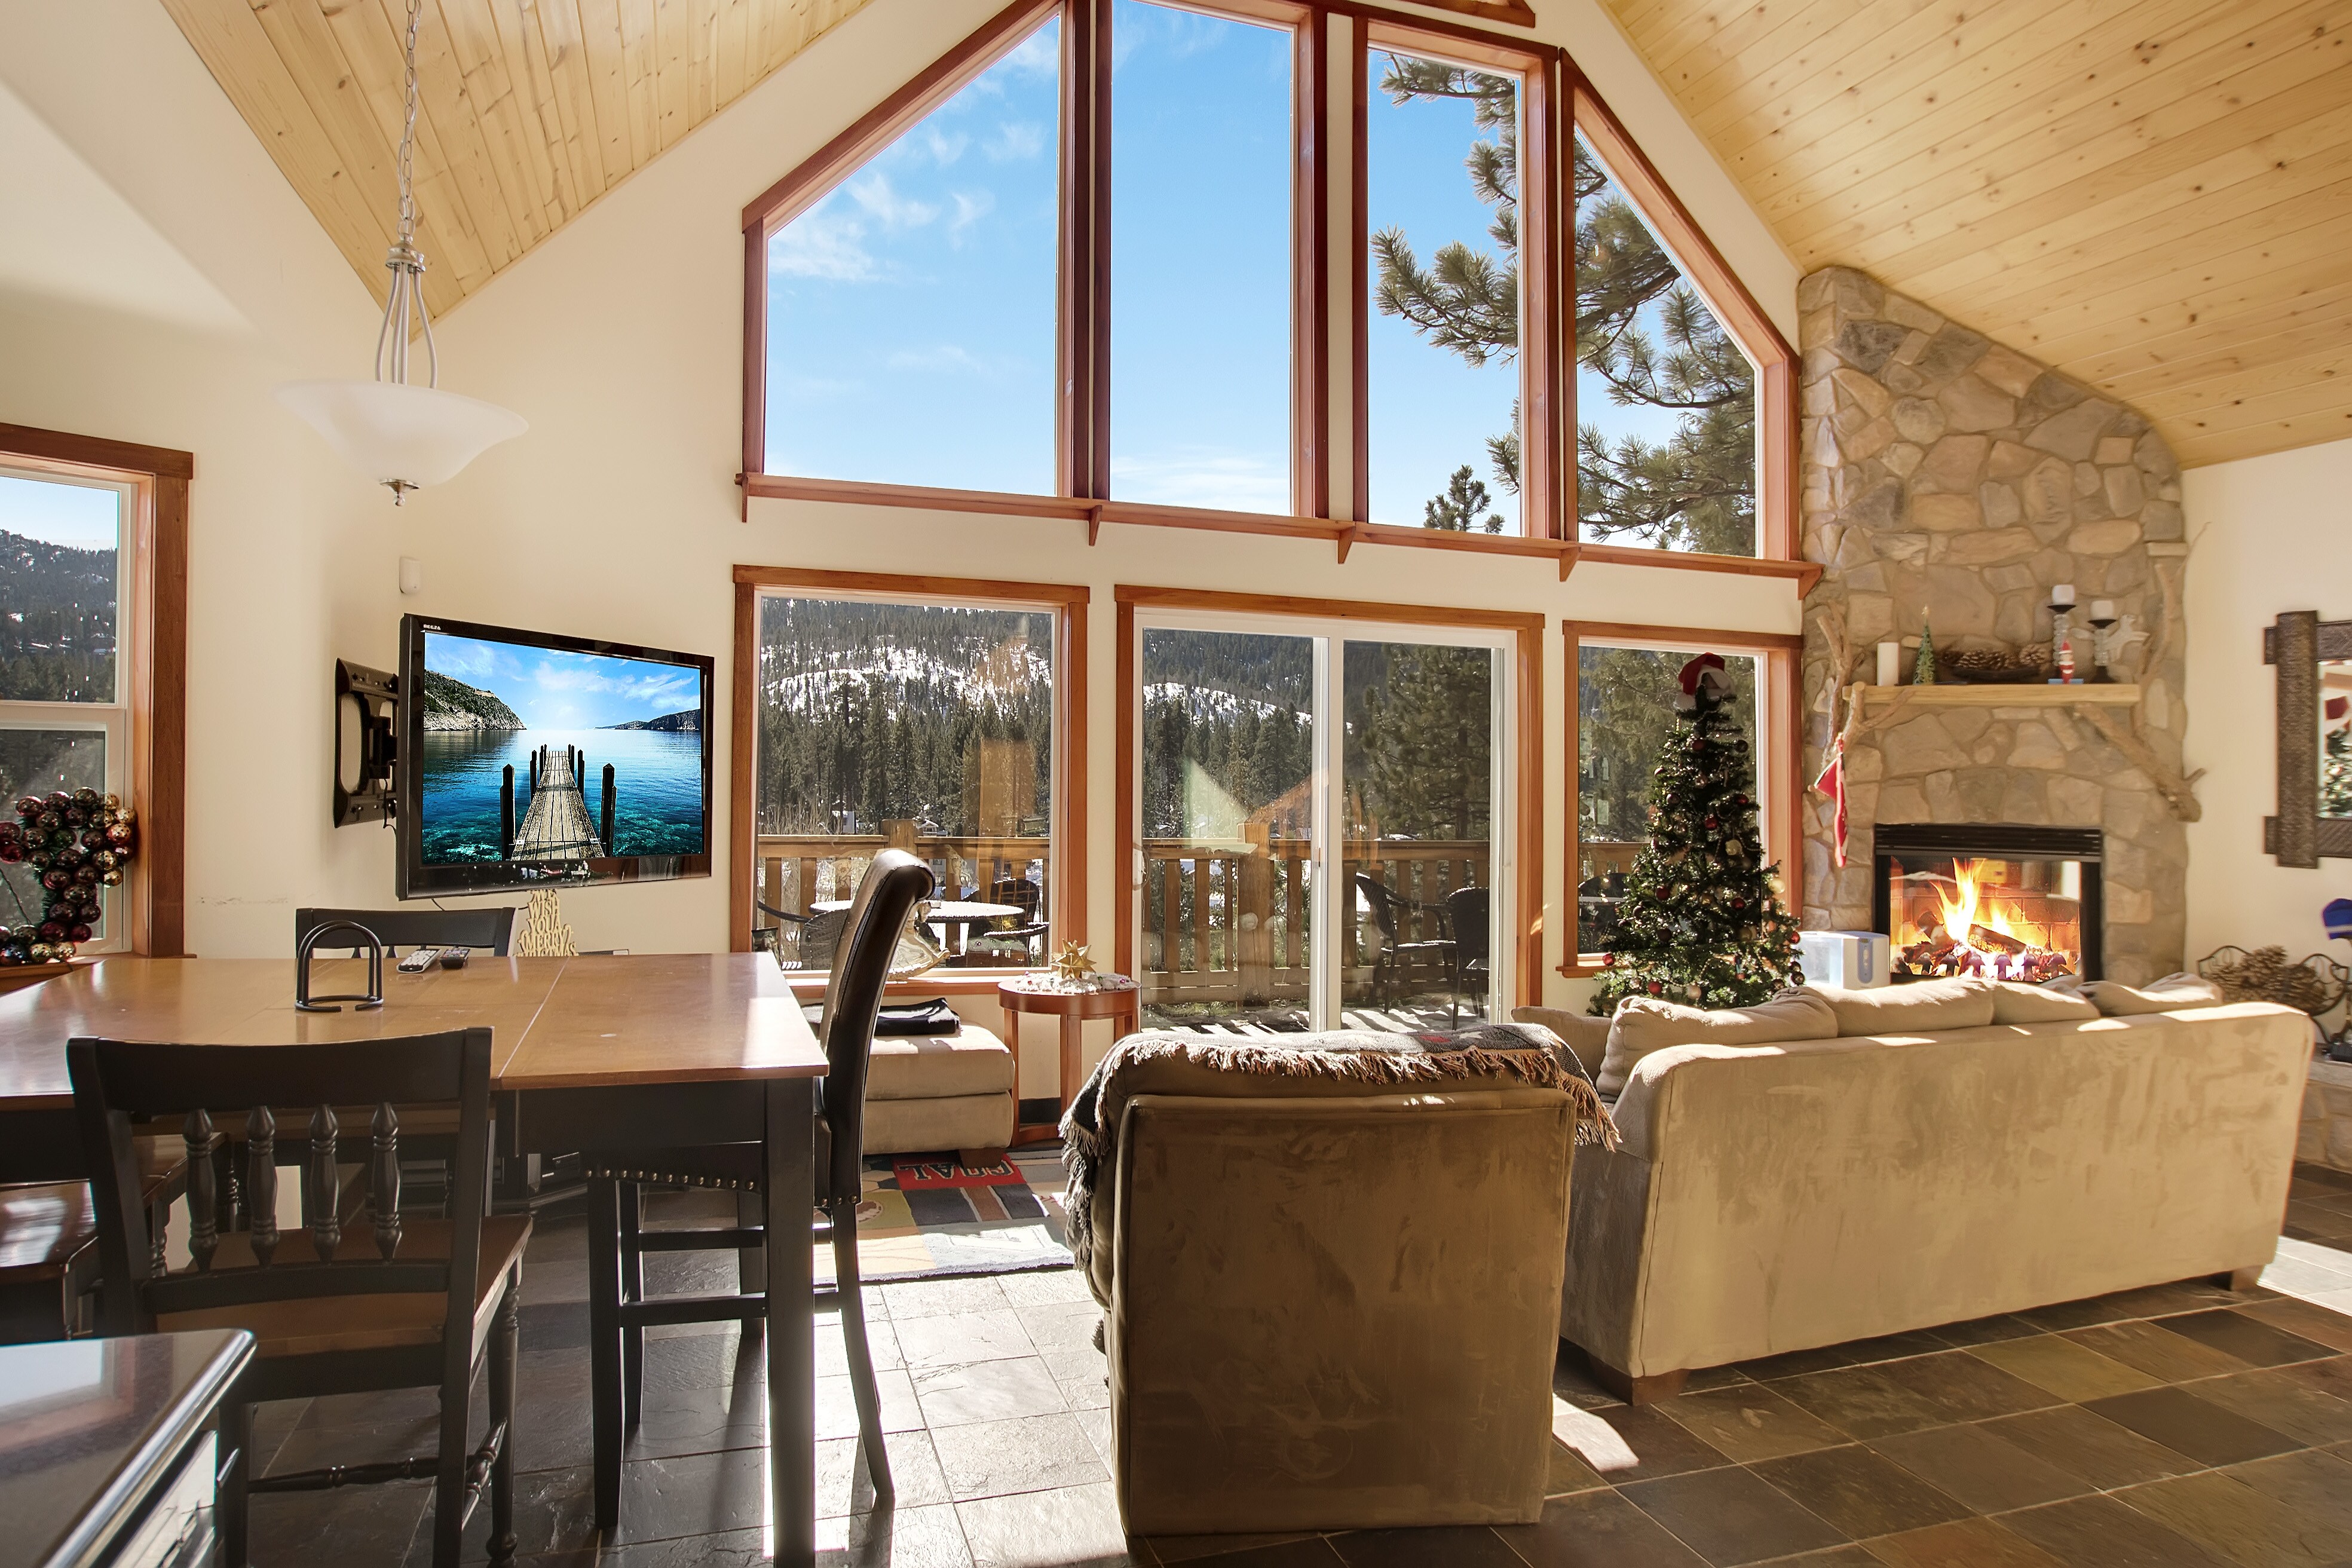 A sun-soaked open living area has seating for 5 across from the 55” Toshiba wall-mounted TV